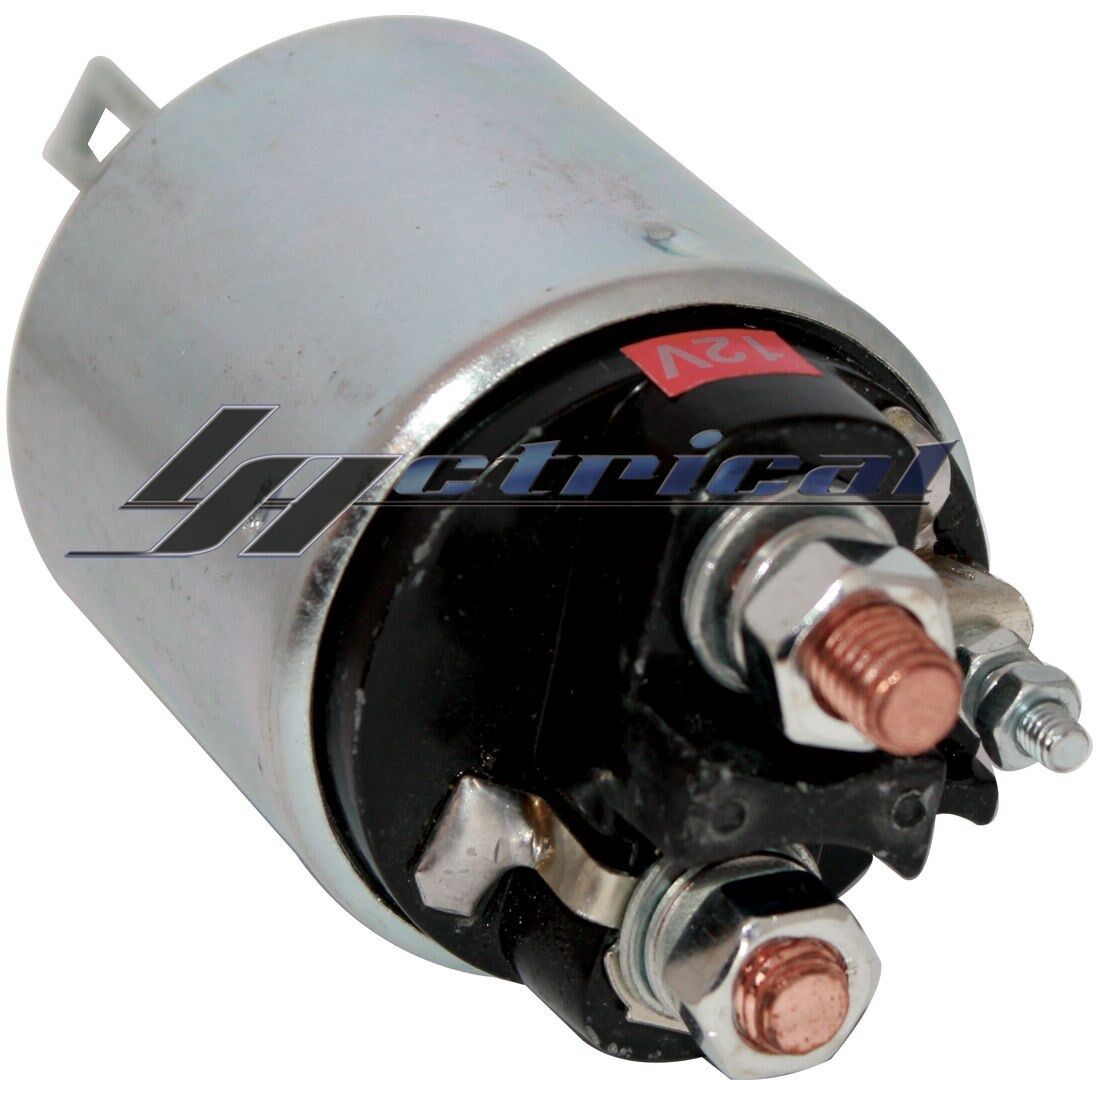 STARTER SOLENOID Fits PLYMOUTH HORIZON CARAVELLE RELIANT SCAMP TURISMO 2.2L 2.5L